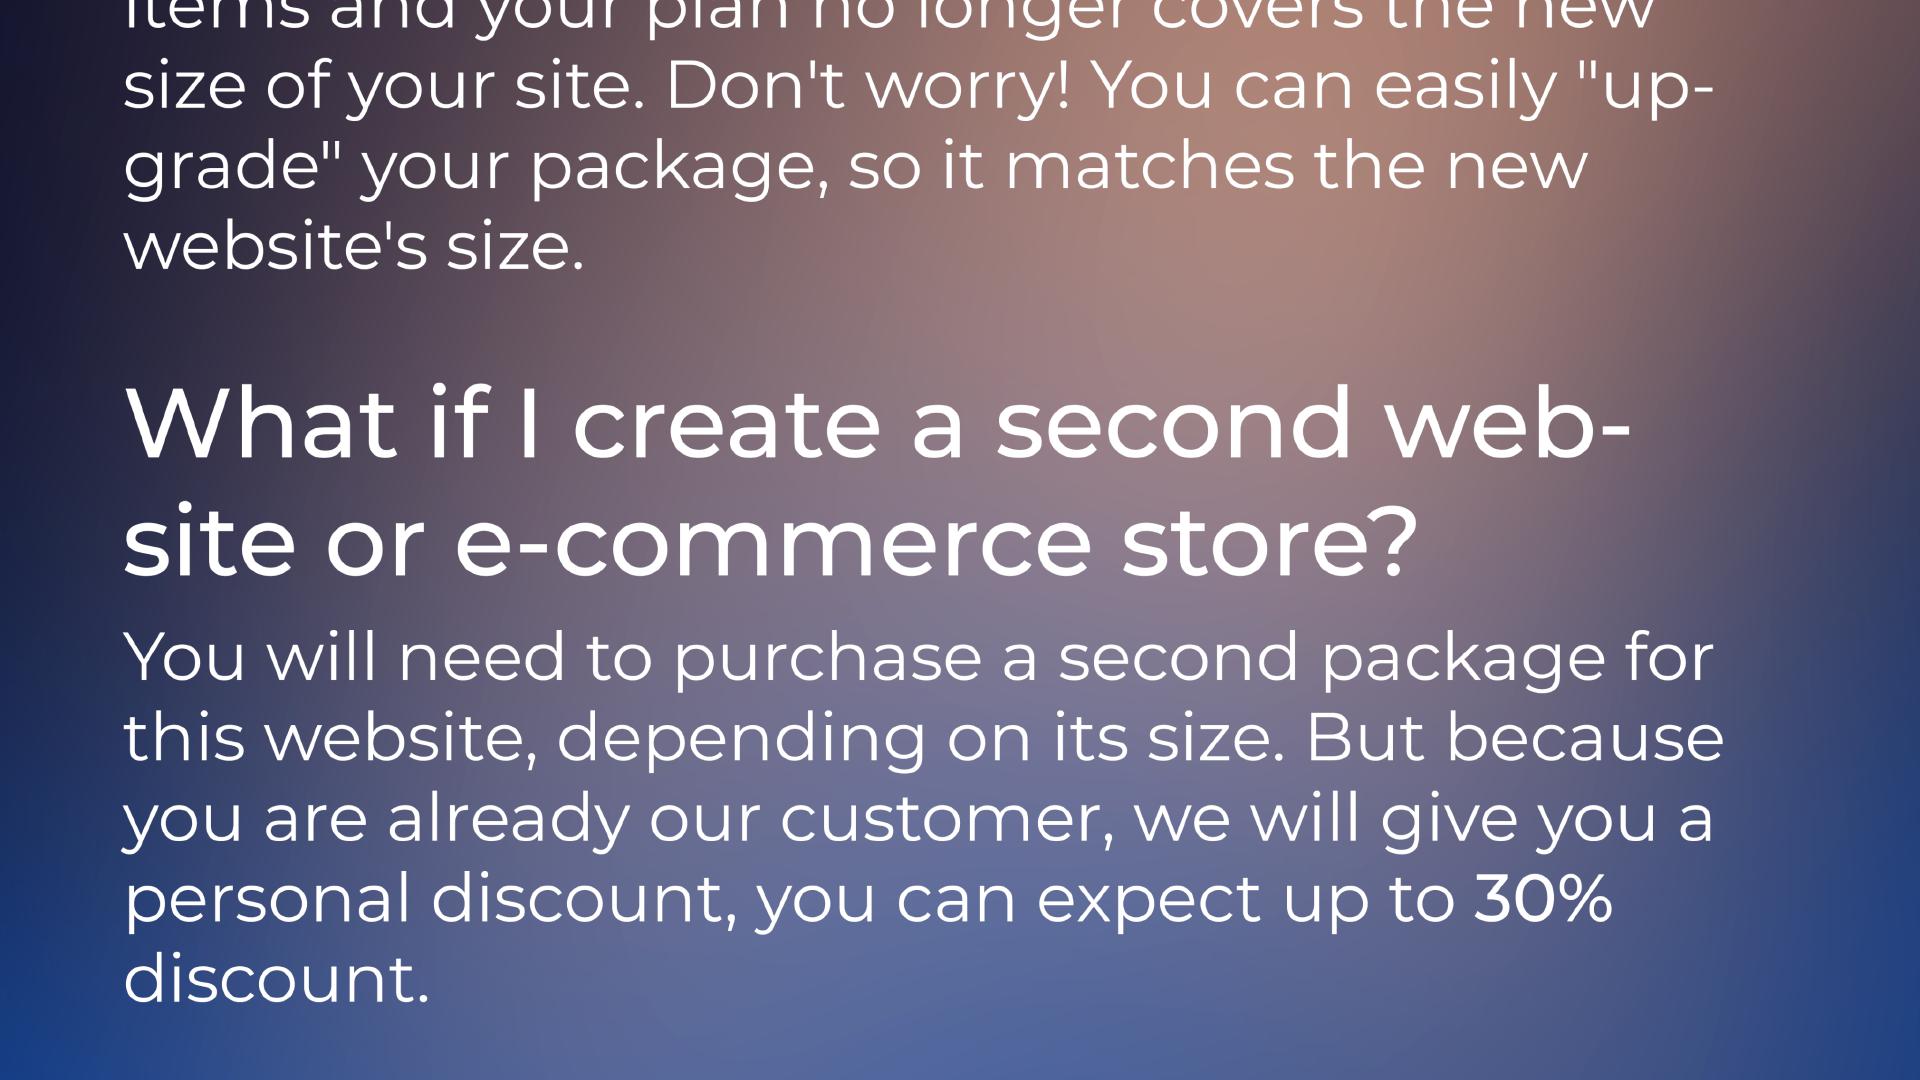 What if I create a second website or e-commerce store? | You will need to purchase a second package for this website, depending on its size. But because you are already our customer, we will give you a personal discount, you can expect up to 30% discount.